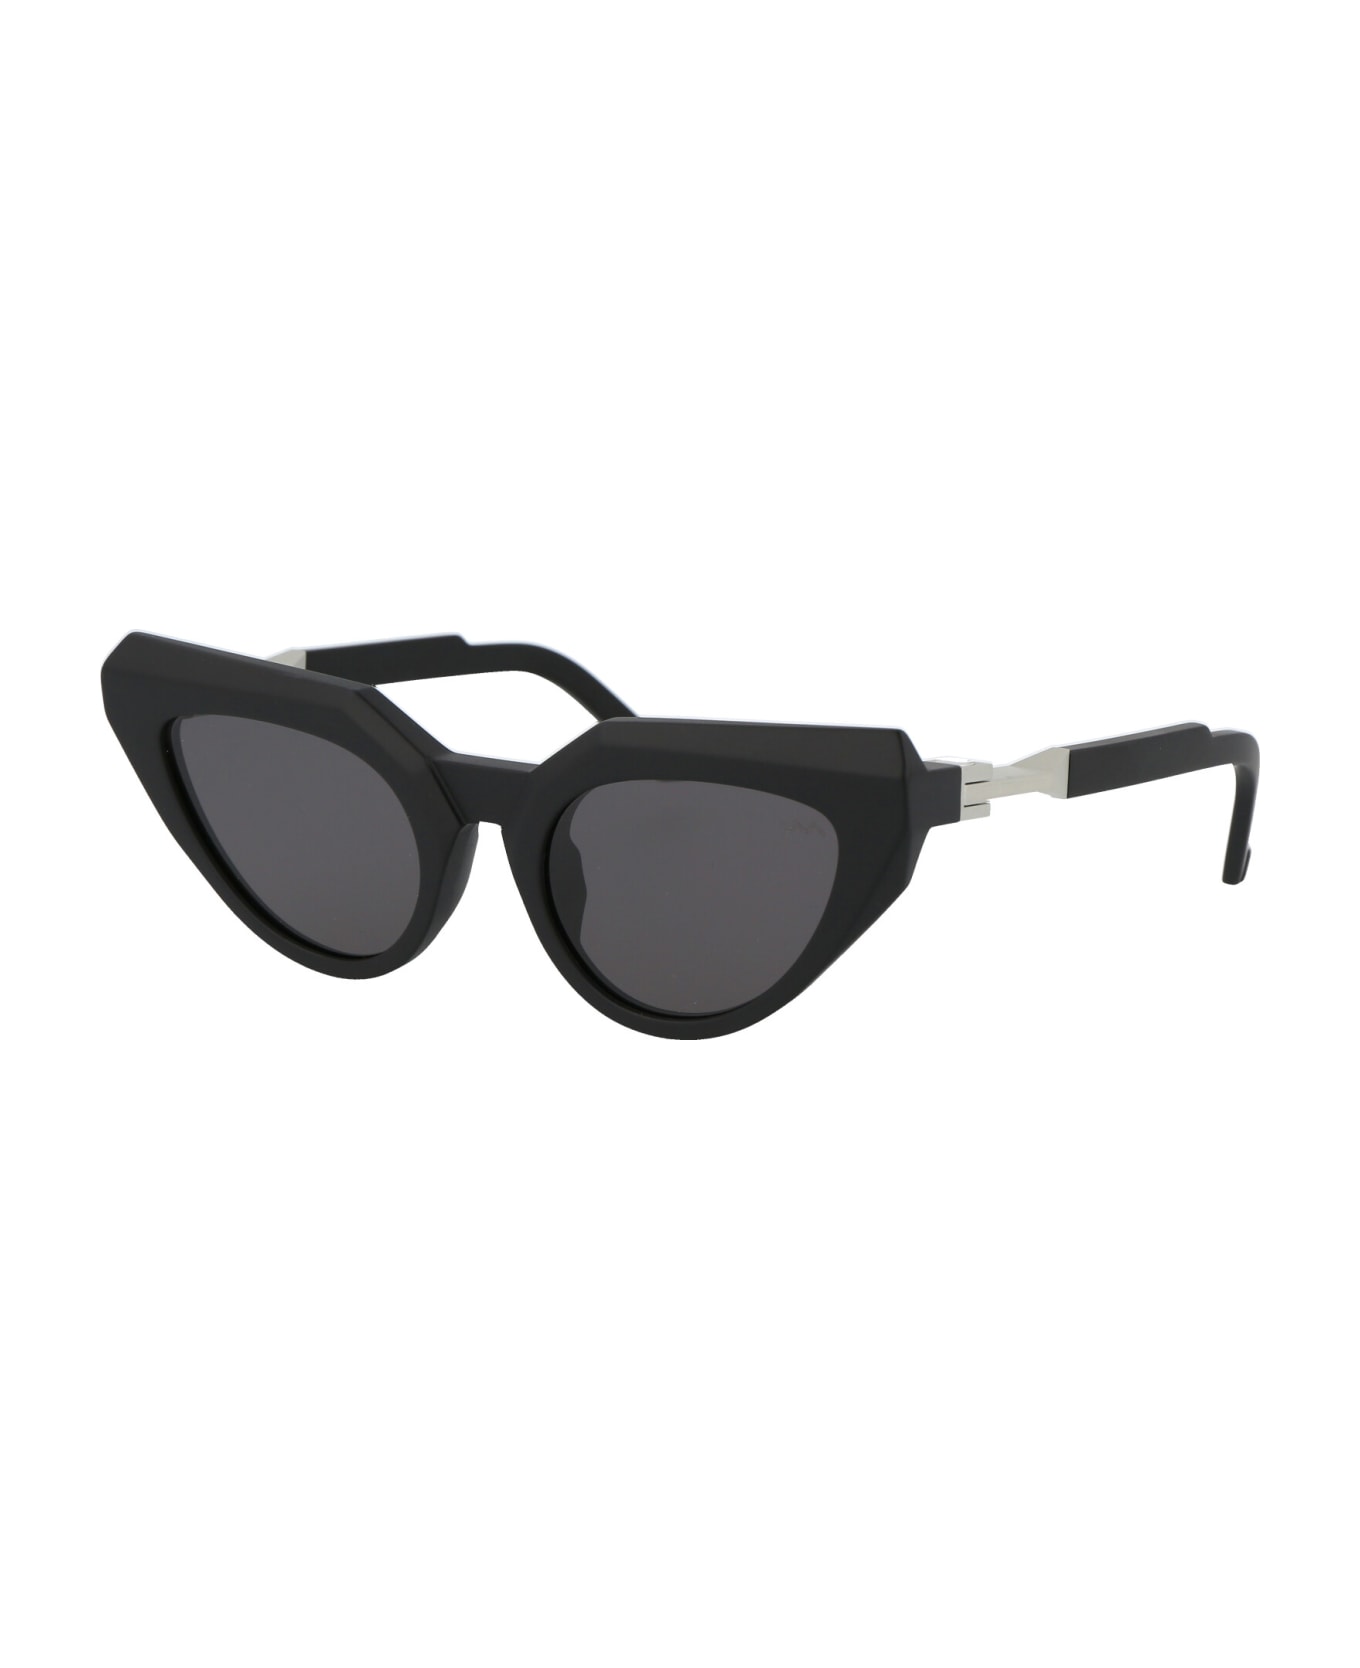 VAVA Bl0028 Sunglasses - and complemented the billowy dress with white sunglasses